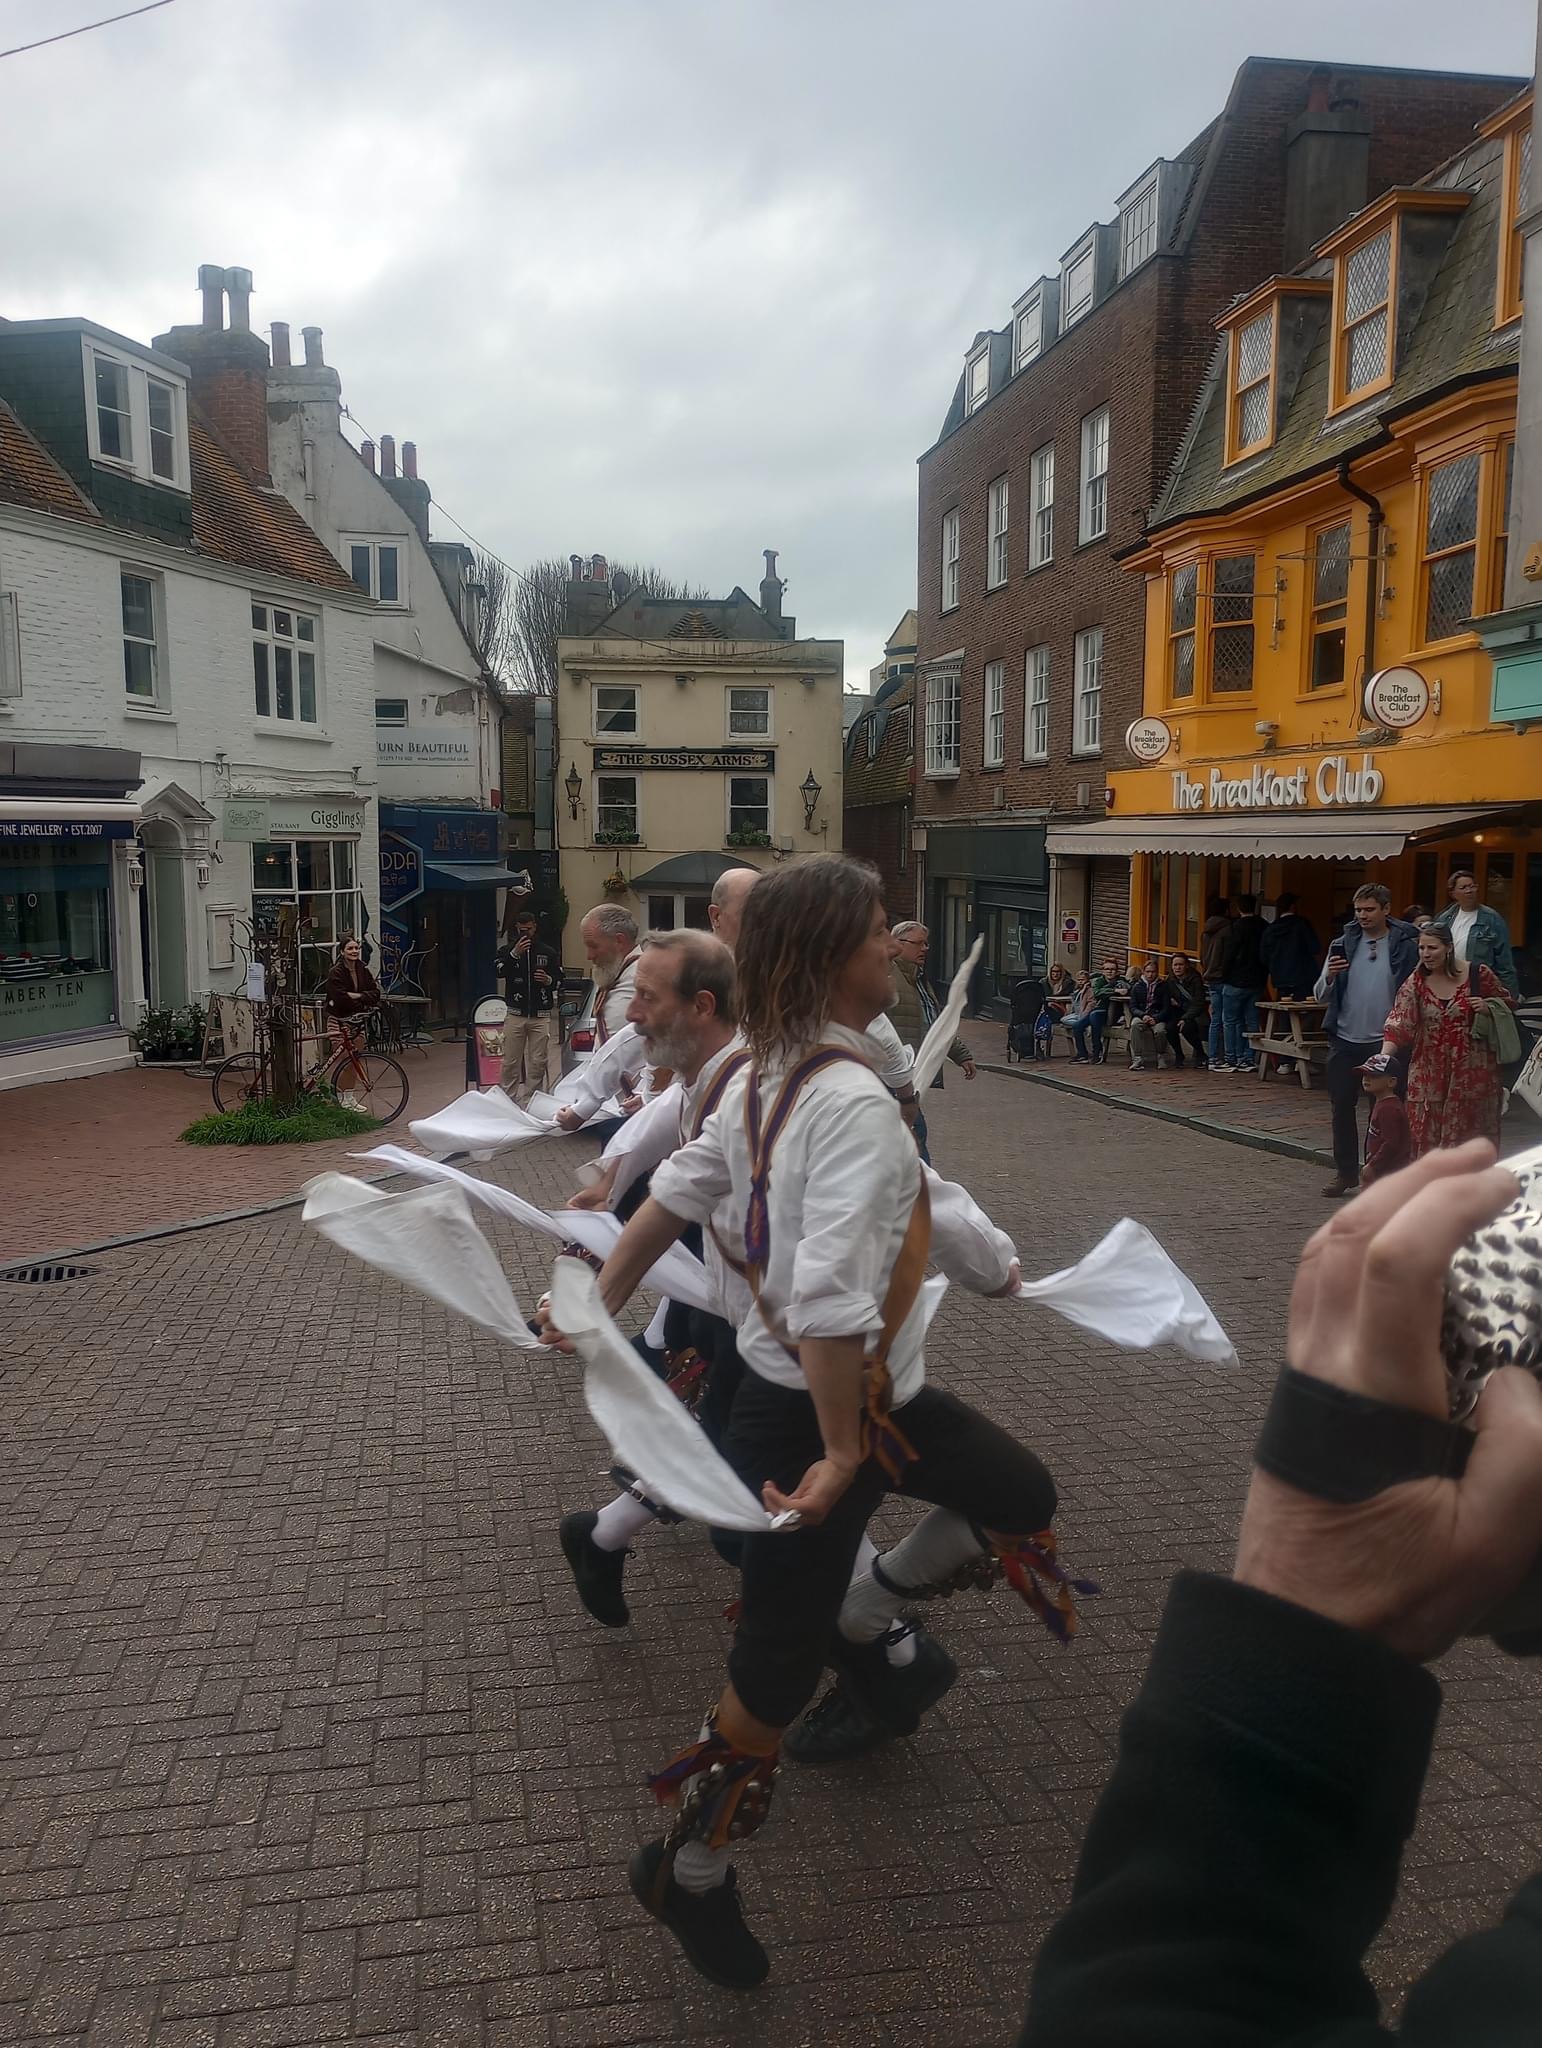 Brighton Morris dance in a single straight line outside The Pump House pub in Brighton on May Day